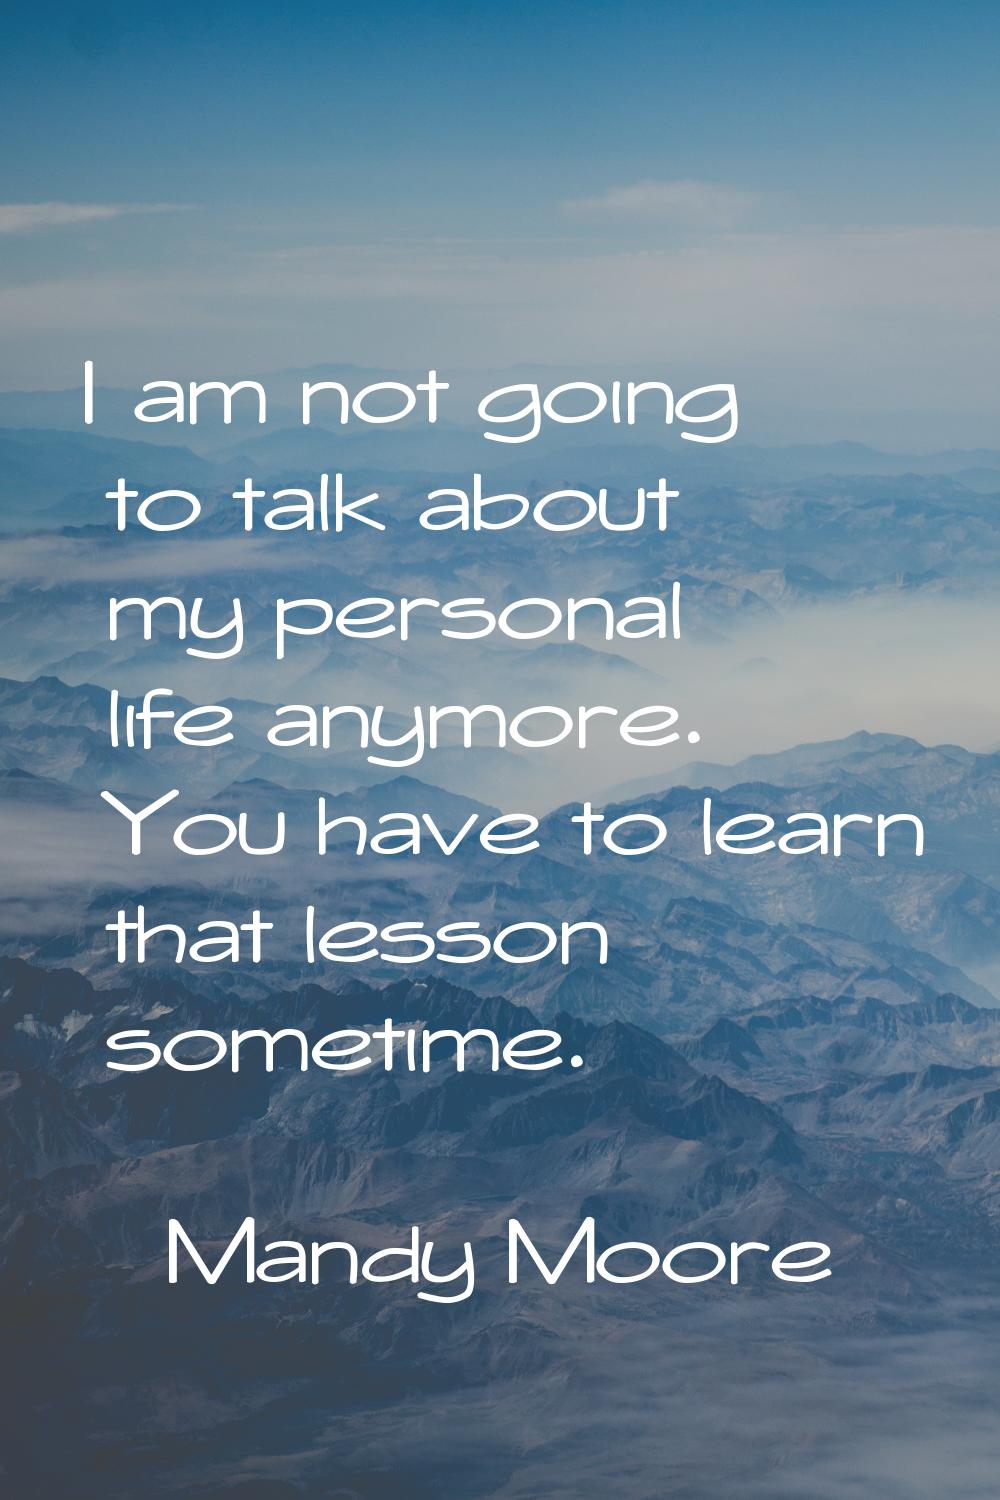 I am not going to talk about my personal life anymore. You have to learn that lesson sometime.